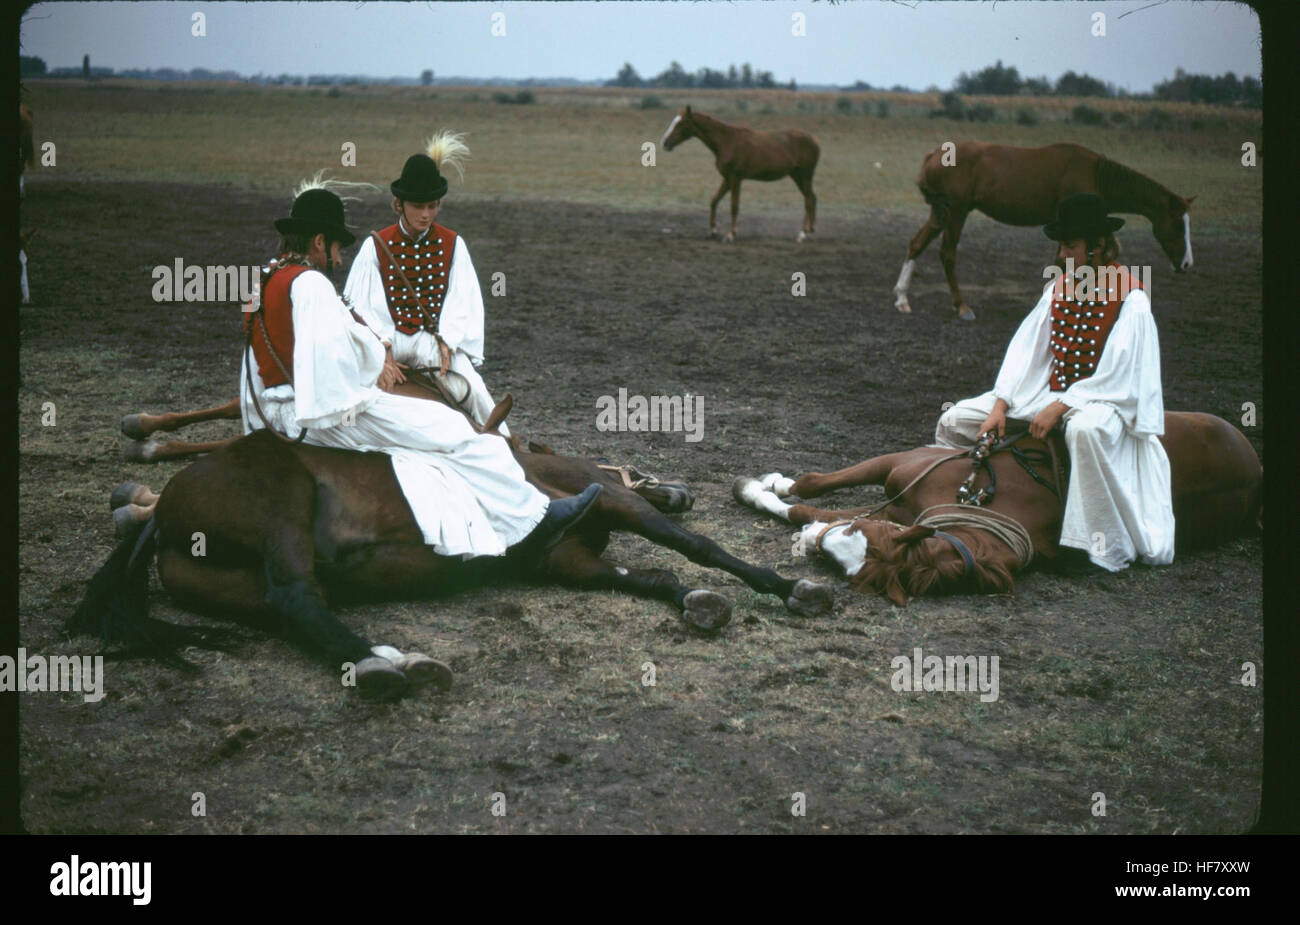 Horsemen of the Puszta in traditional dress performing equestrian arts traditional to the horse culture of the Hungarian steppes; Hungary. Stock Photo